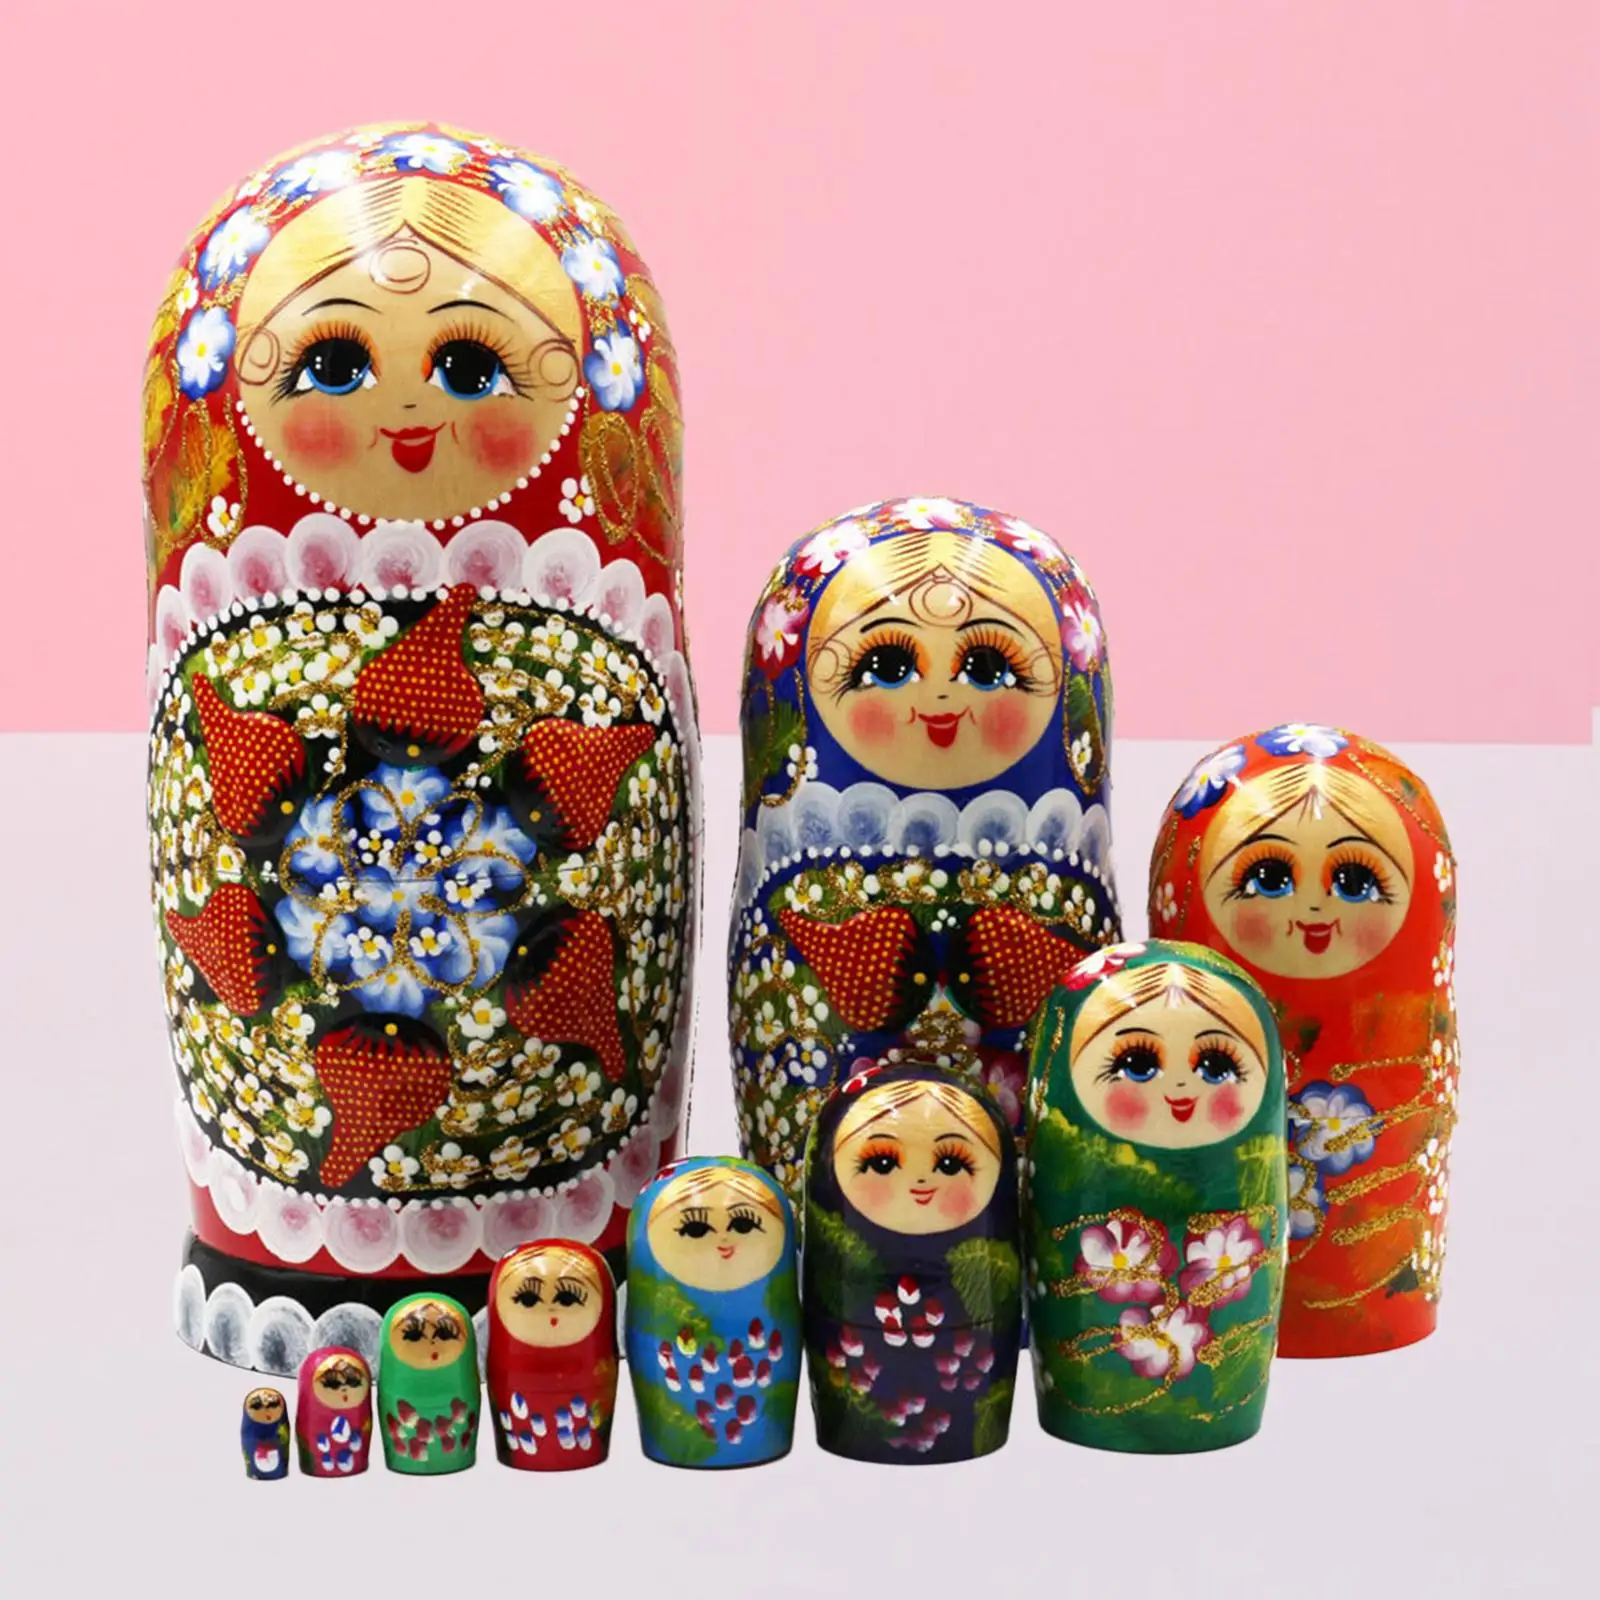 10 Pieces Stacking Doll Set Desk Handmade Russian Nesting Dolls Ornaments